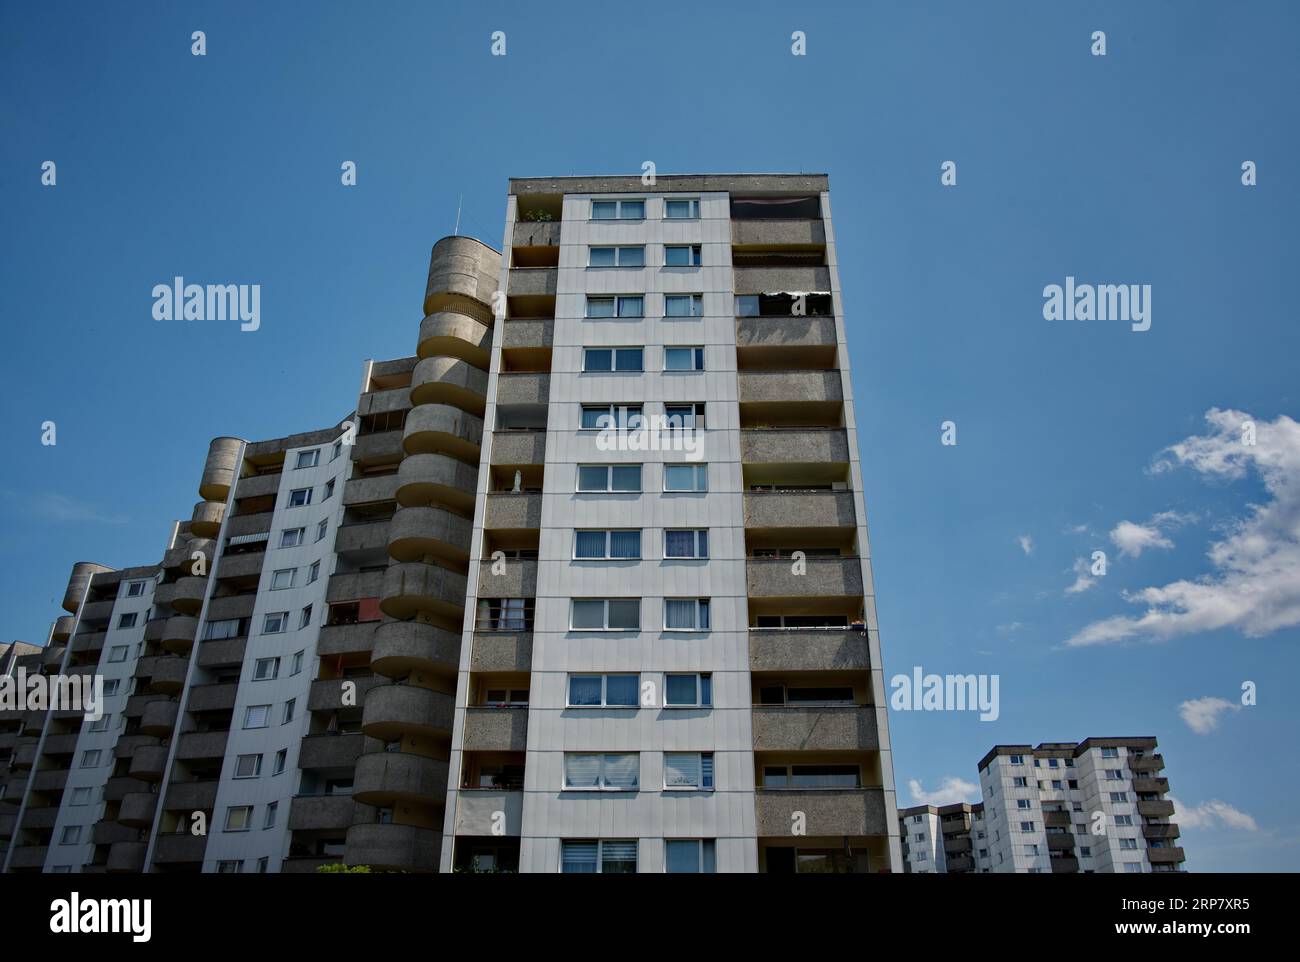 Two apartment buildings in the Gropiusstadt district of Neukoelln, Berlin, Germany Stock Photo